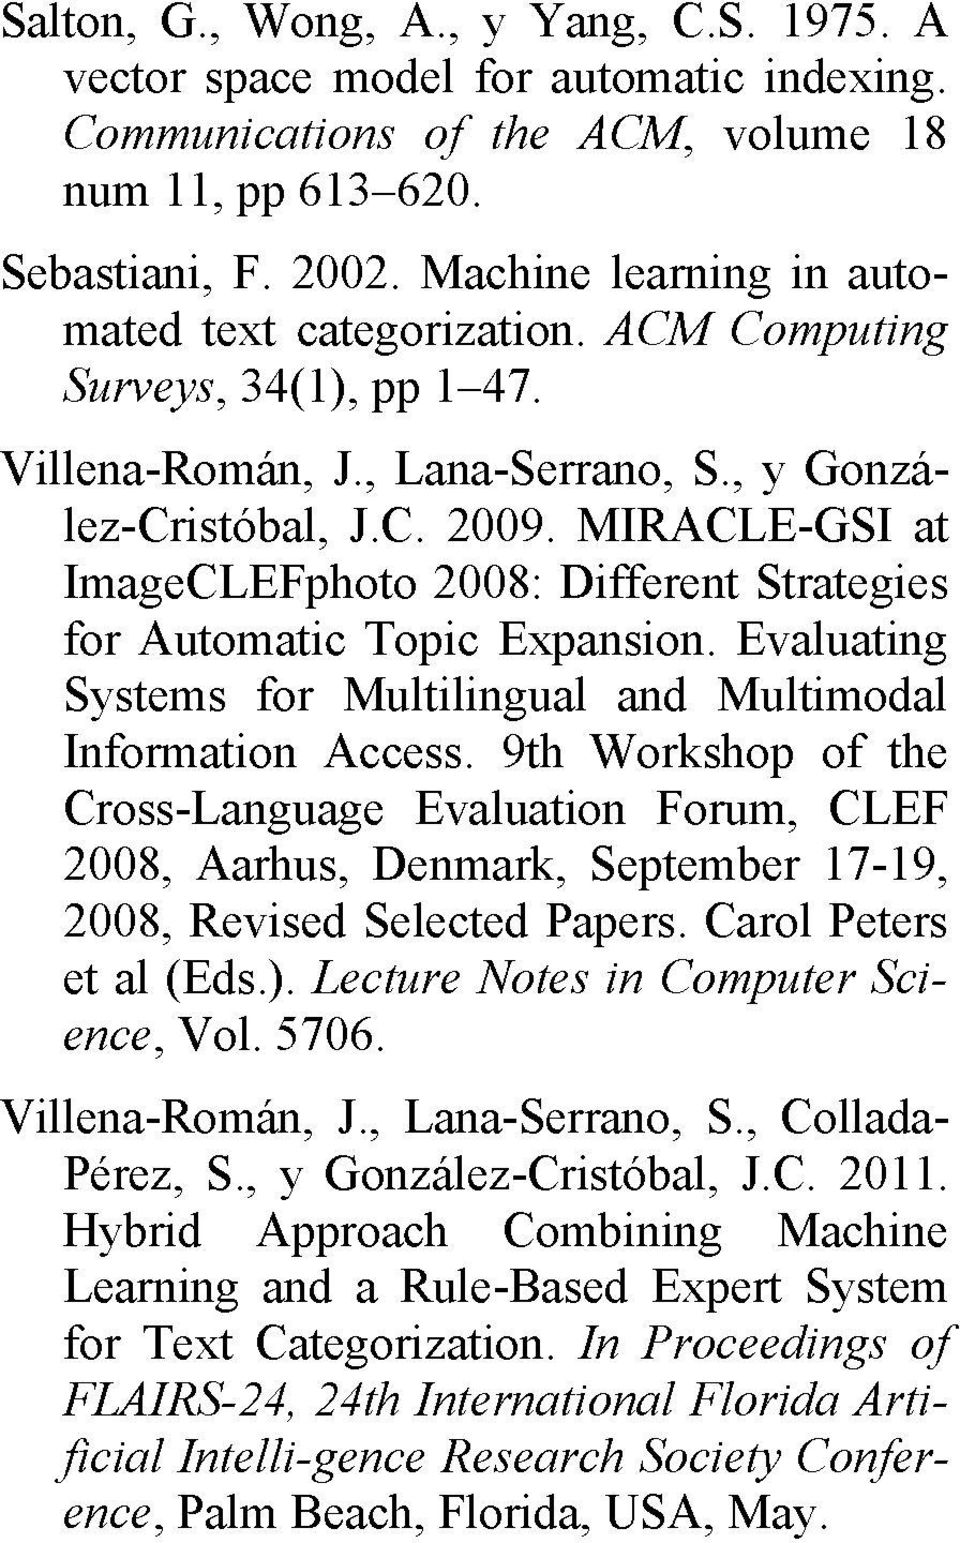 MIRACLE-GSI at ImageCLEFphoto 2008: Different Strategies for Automatic Topic Expansión. Evaluating Systems for Multilingual and Multimodal Information Access.